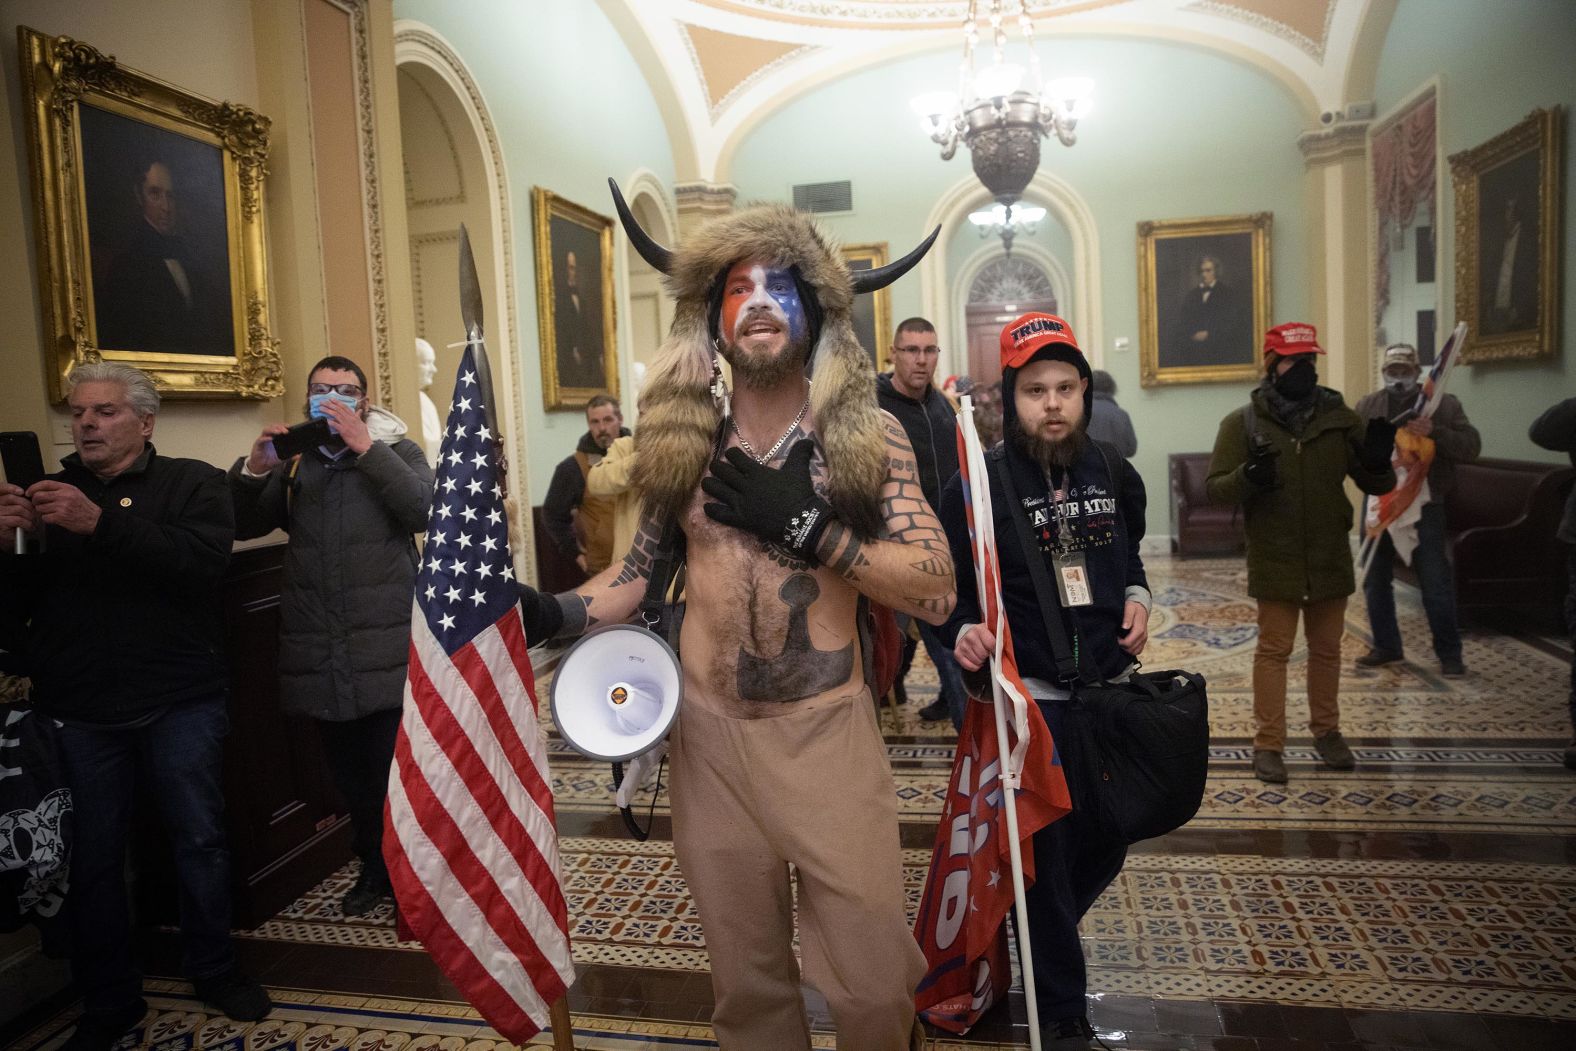 <a href="https://www.cnn.com/2021/01/07/us/insurrection-capitol-extremist-groups-invs/index.html" target="_blank">One of the most recognizable figures in the crowd</a> was a man in his 30s with a painted face, fur hat and a helmet with horns. The protester, Jacob Chansley — known by followers as the QAnon Shaman — quickly became a symbol of the bizarre and frightening spectacle. In the months leading up to the riot, Chansley had been a regular presence at pro-Trump protests in Arizona, including demonstrations outside the Maricopa County vote-counting center. In November 2021, <a href="https://www.cnn.com/2021/11/17/politics/jacob-chansley-qanon-shaman-january-6-sentencing/index.html" target="_blank">he was sentenced to 41 months in prison</a> for his role in the Capitol riot.